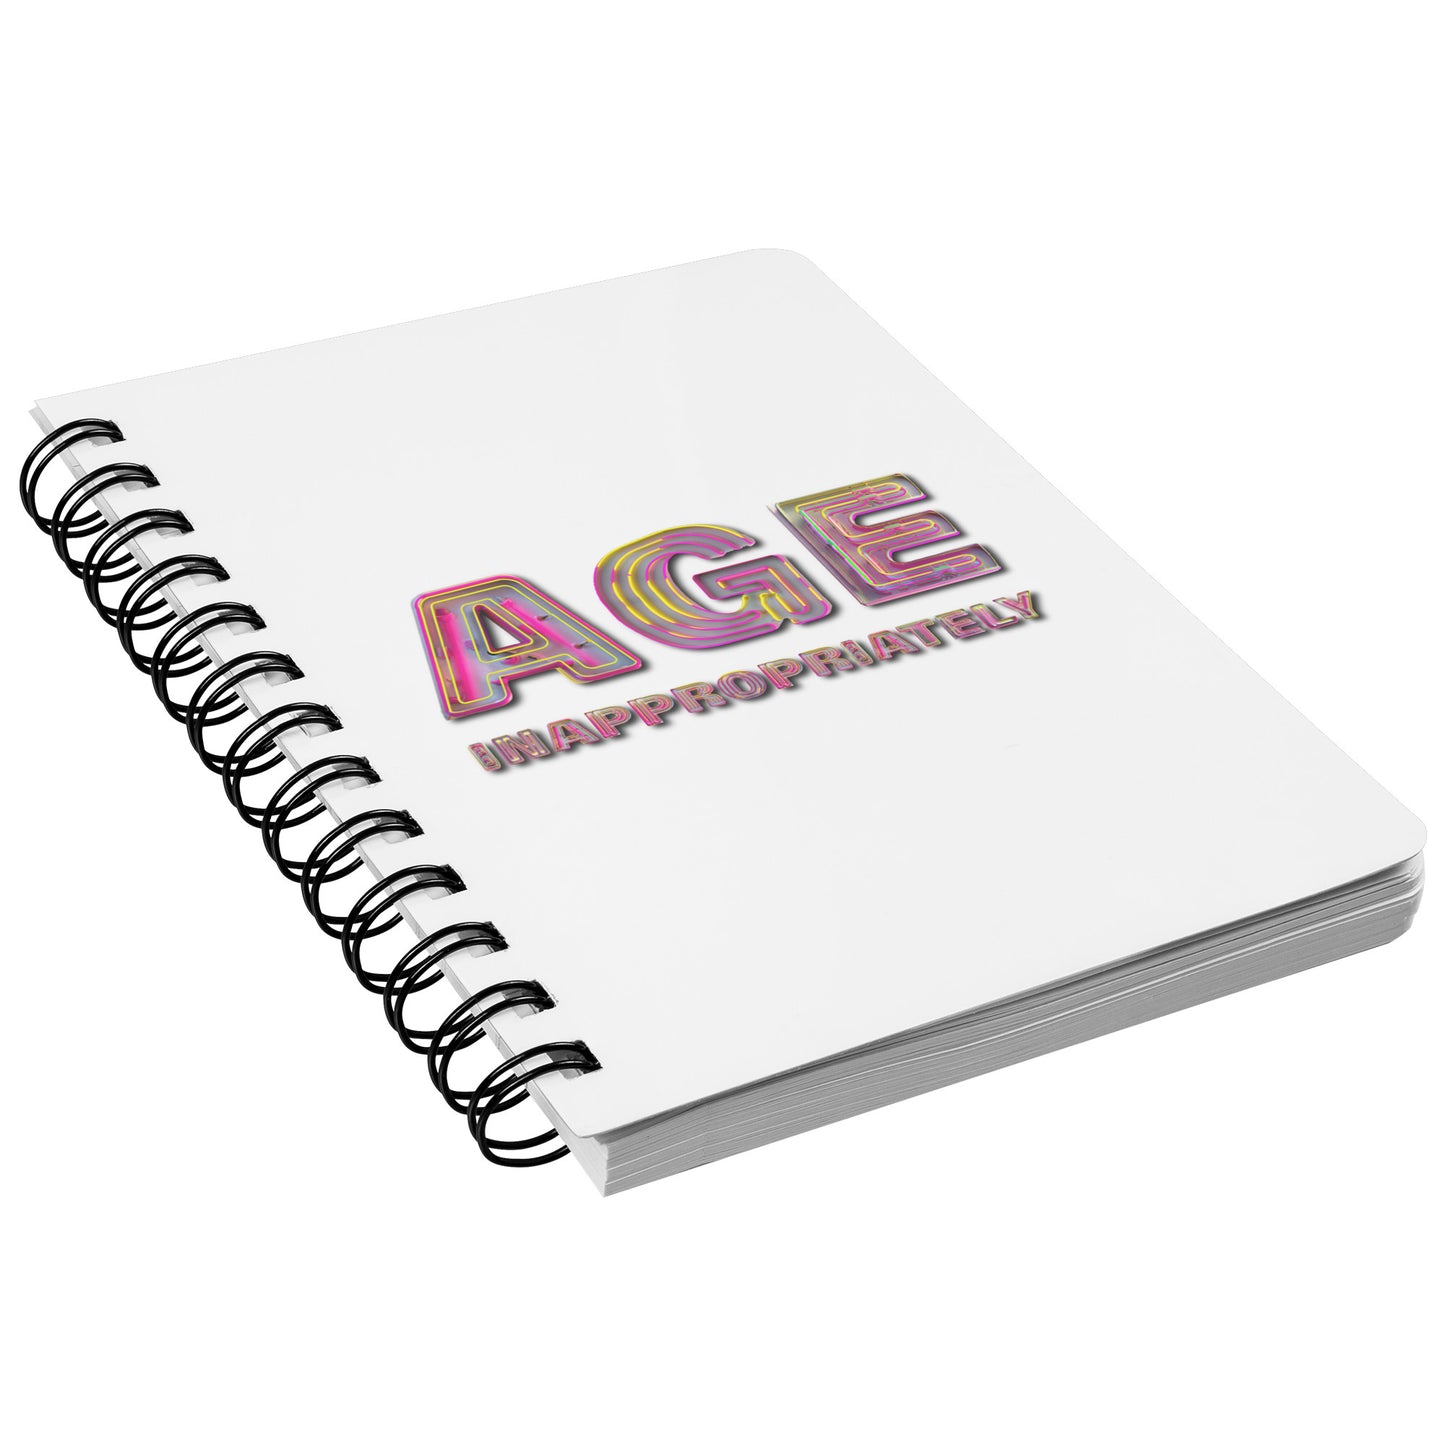 Age Inappropriately Spiral Notebook with Lined Paper